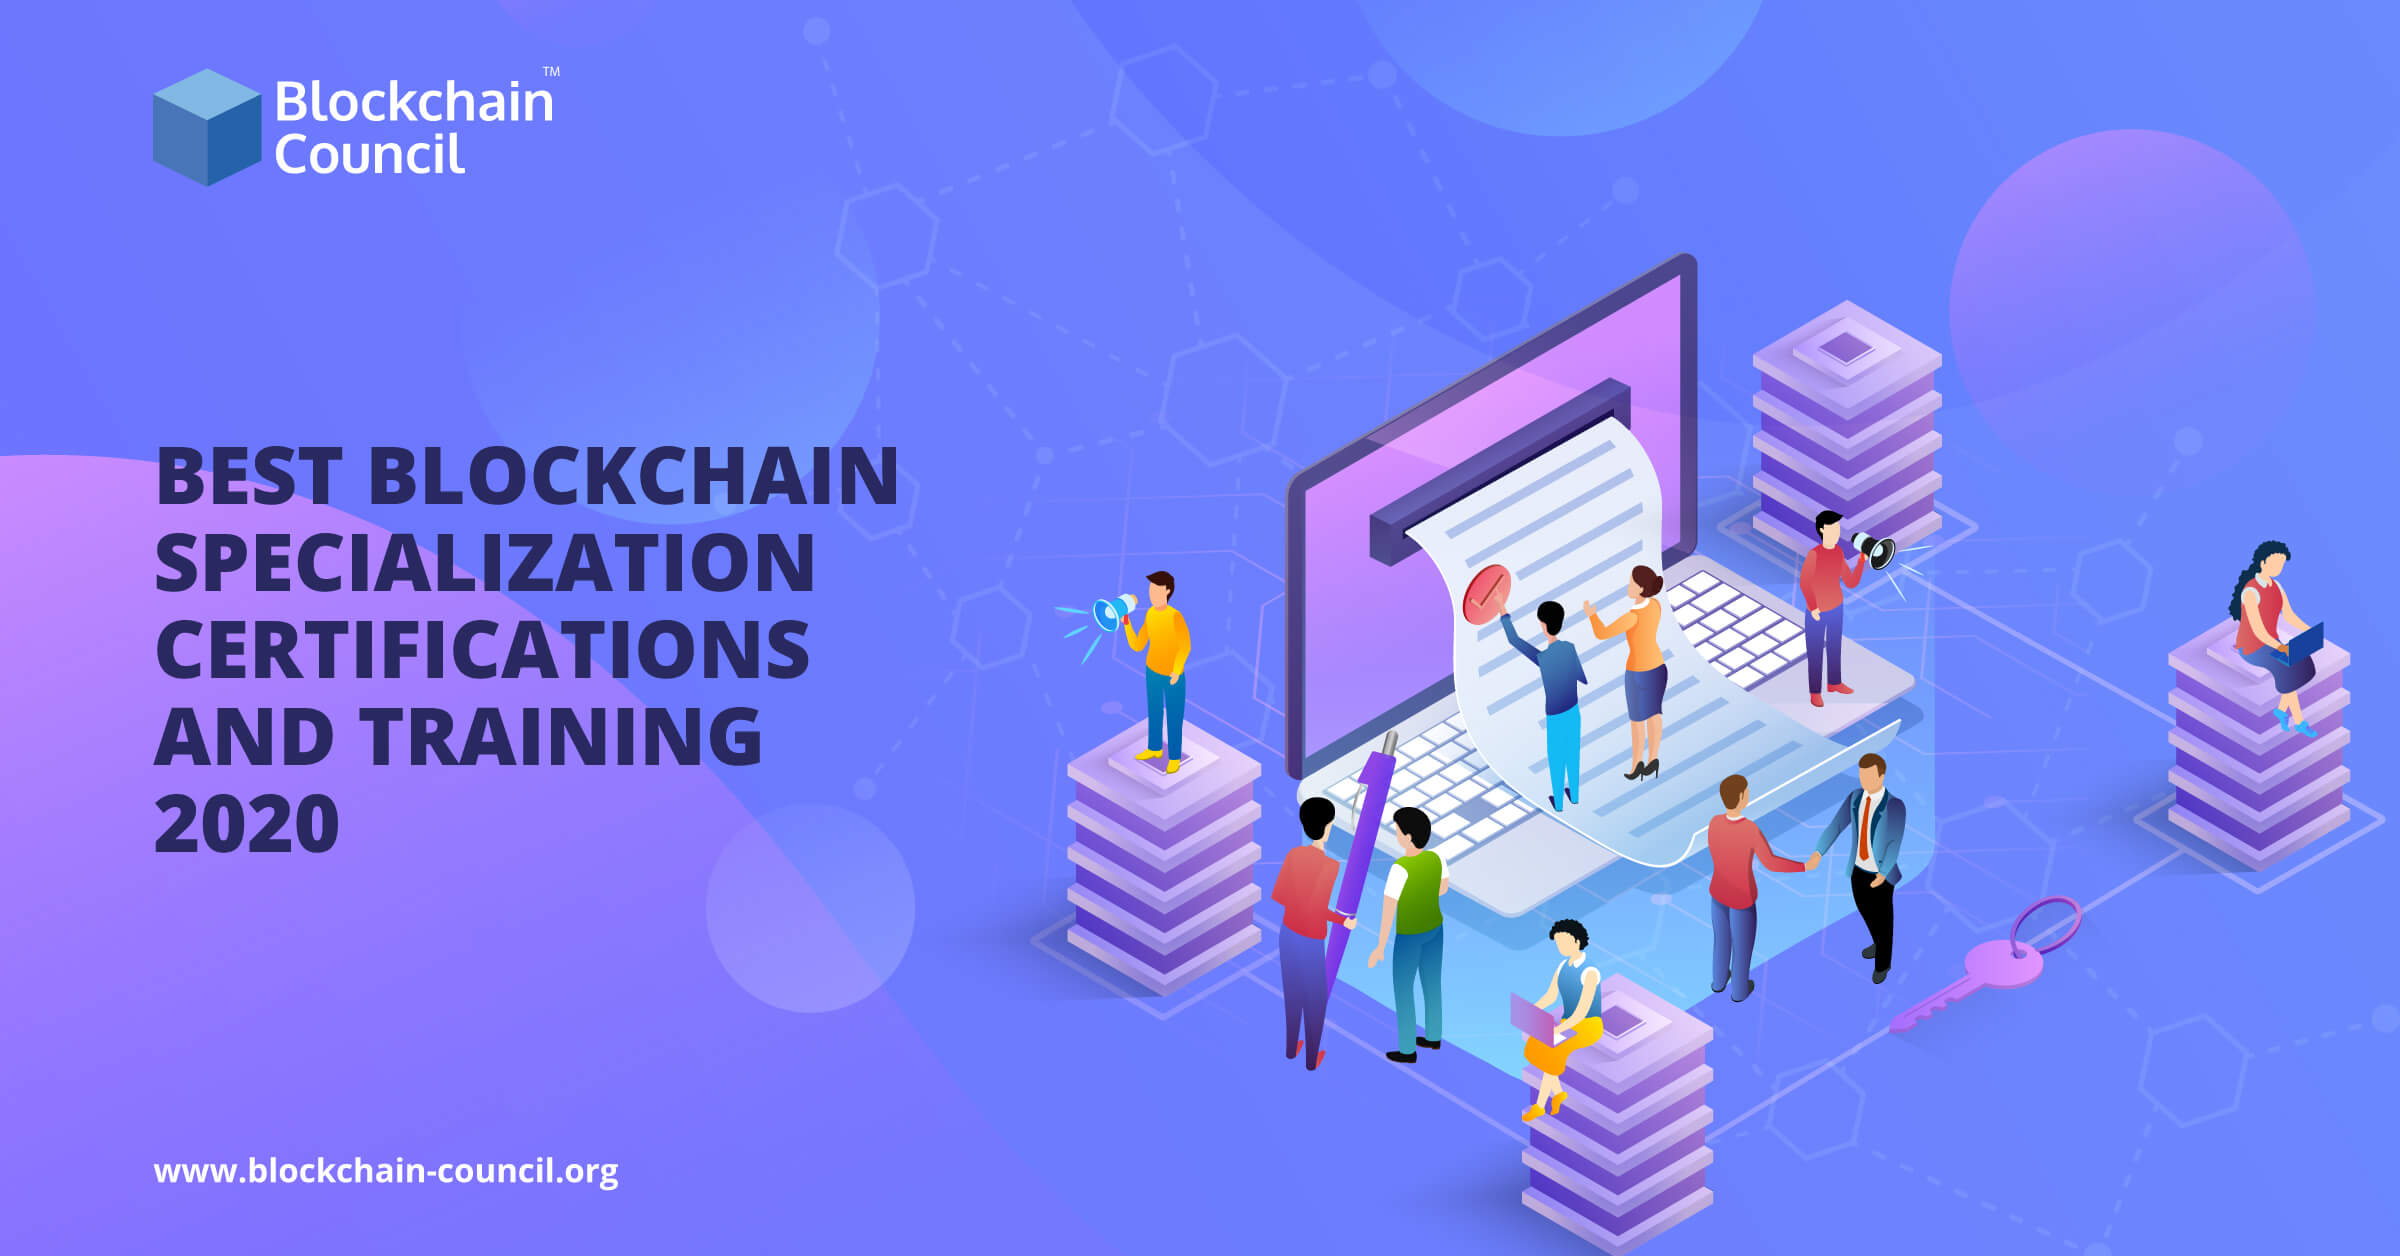 Best Blockchain Specialization Certifications and Training 2020